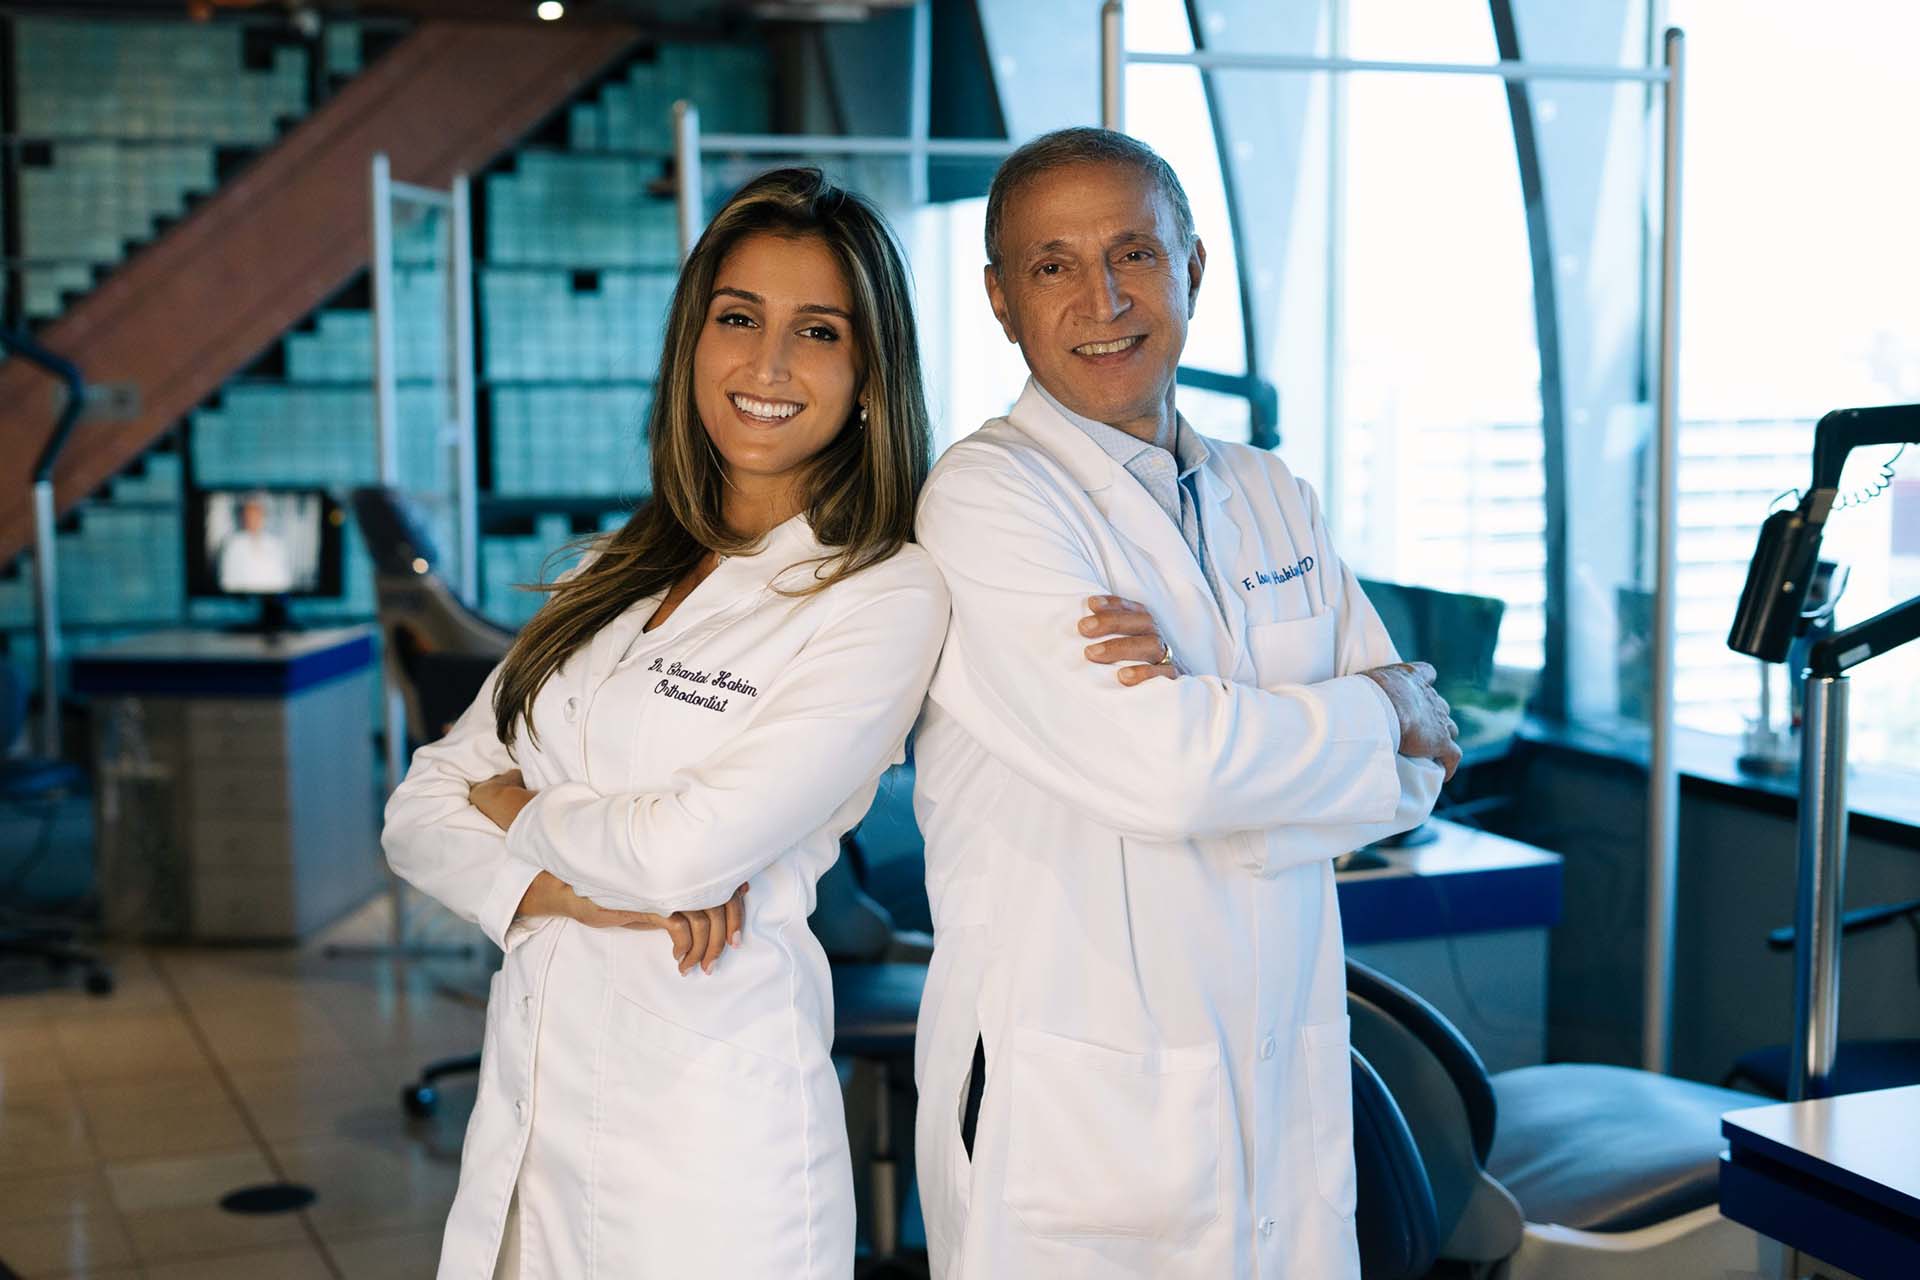 Dr. Chantal Hakim and Dr. F. Isaac Hakim at the Orthospaceship in Los Angeles, a Southern California orthodontic practice serving San Fernando Valley.